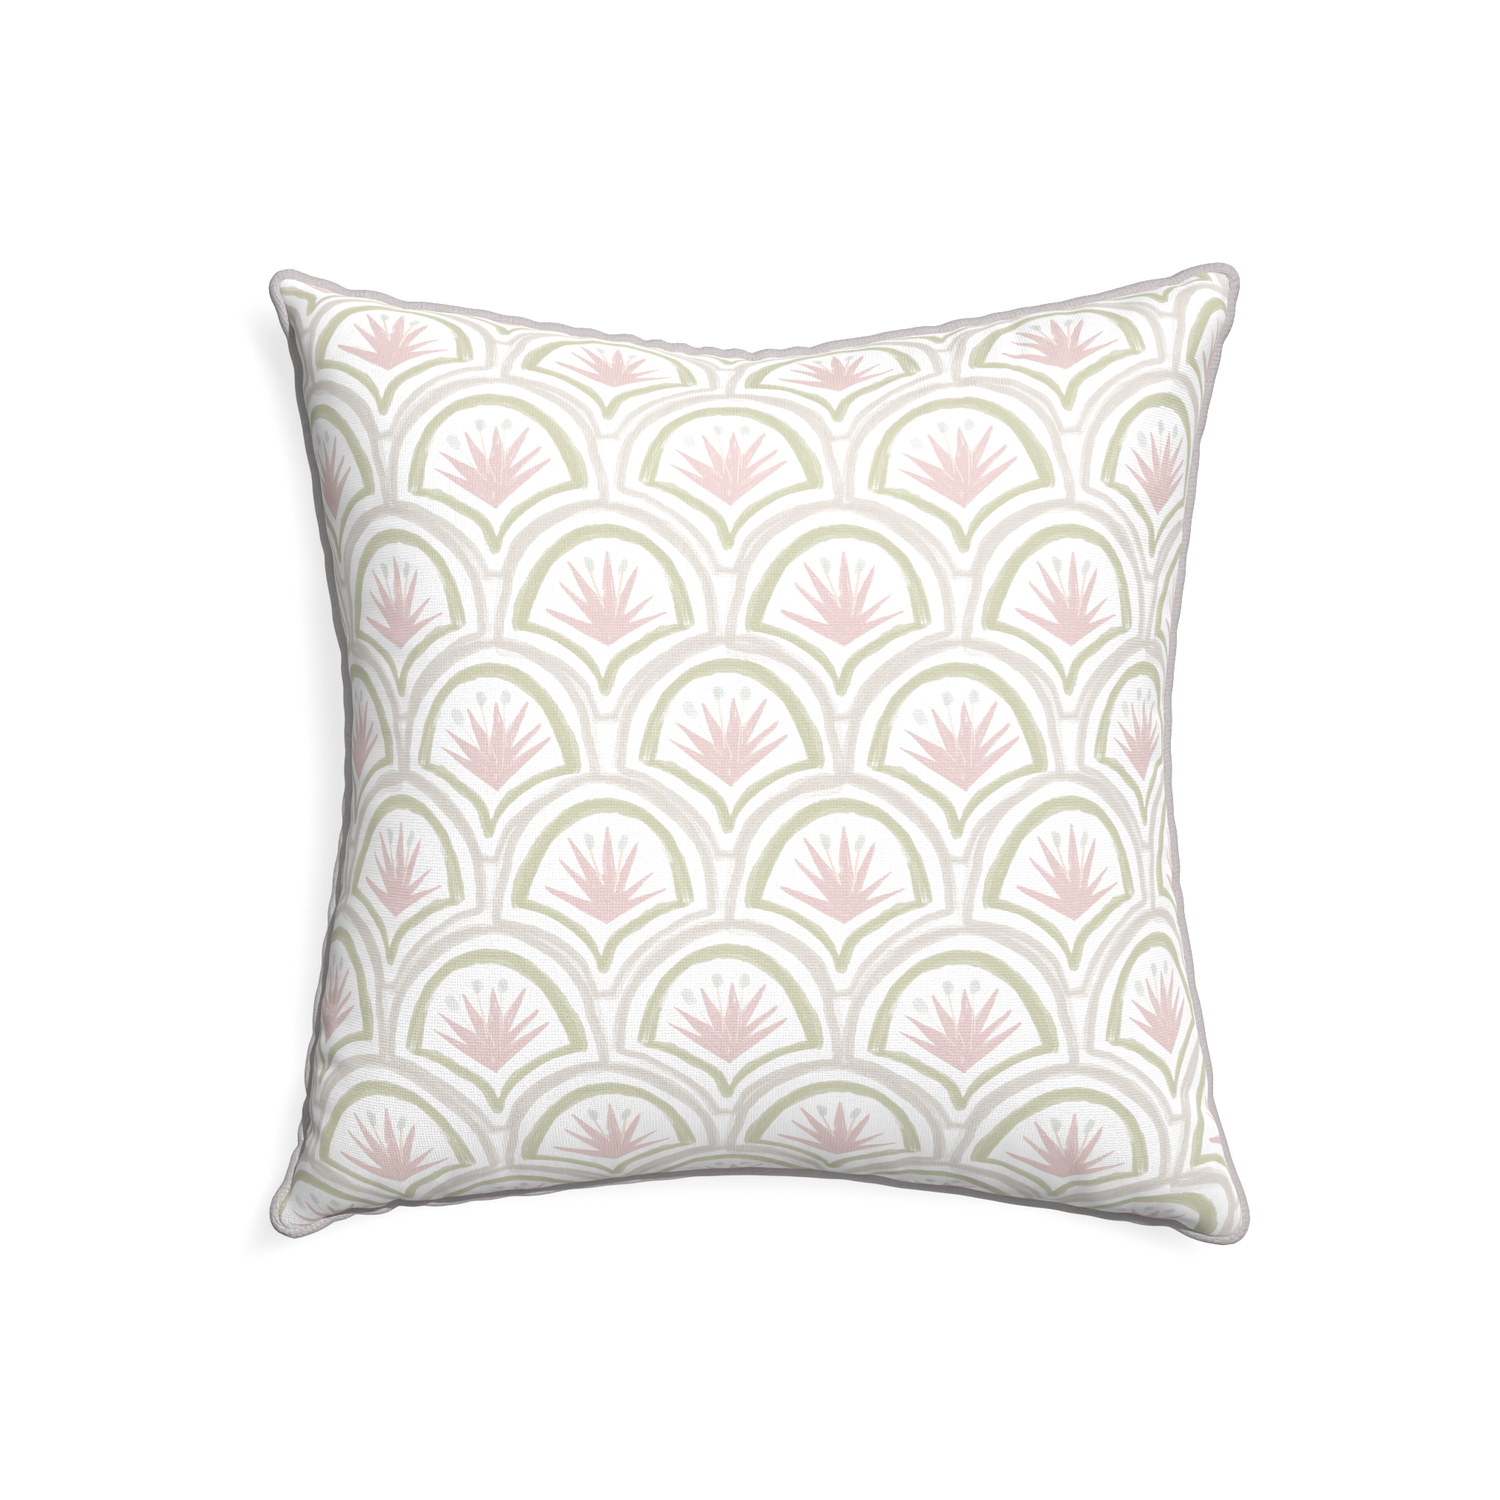 22-square thatcher rose custom pink & green palmpillow with pebble piping on white background